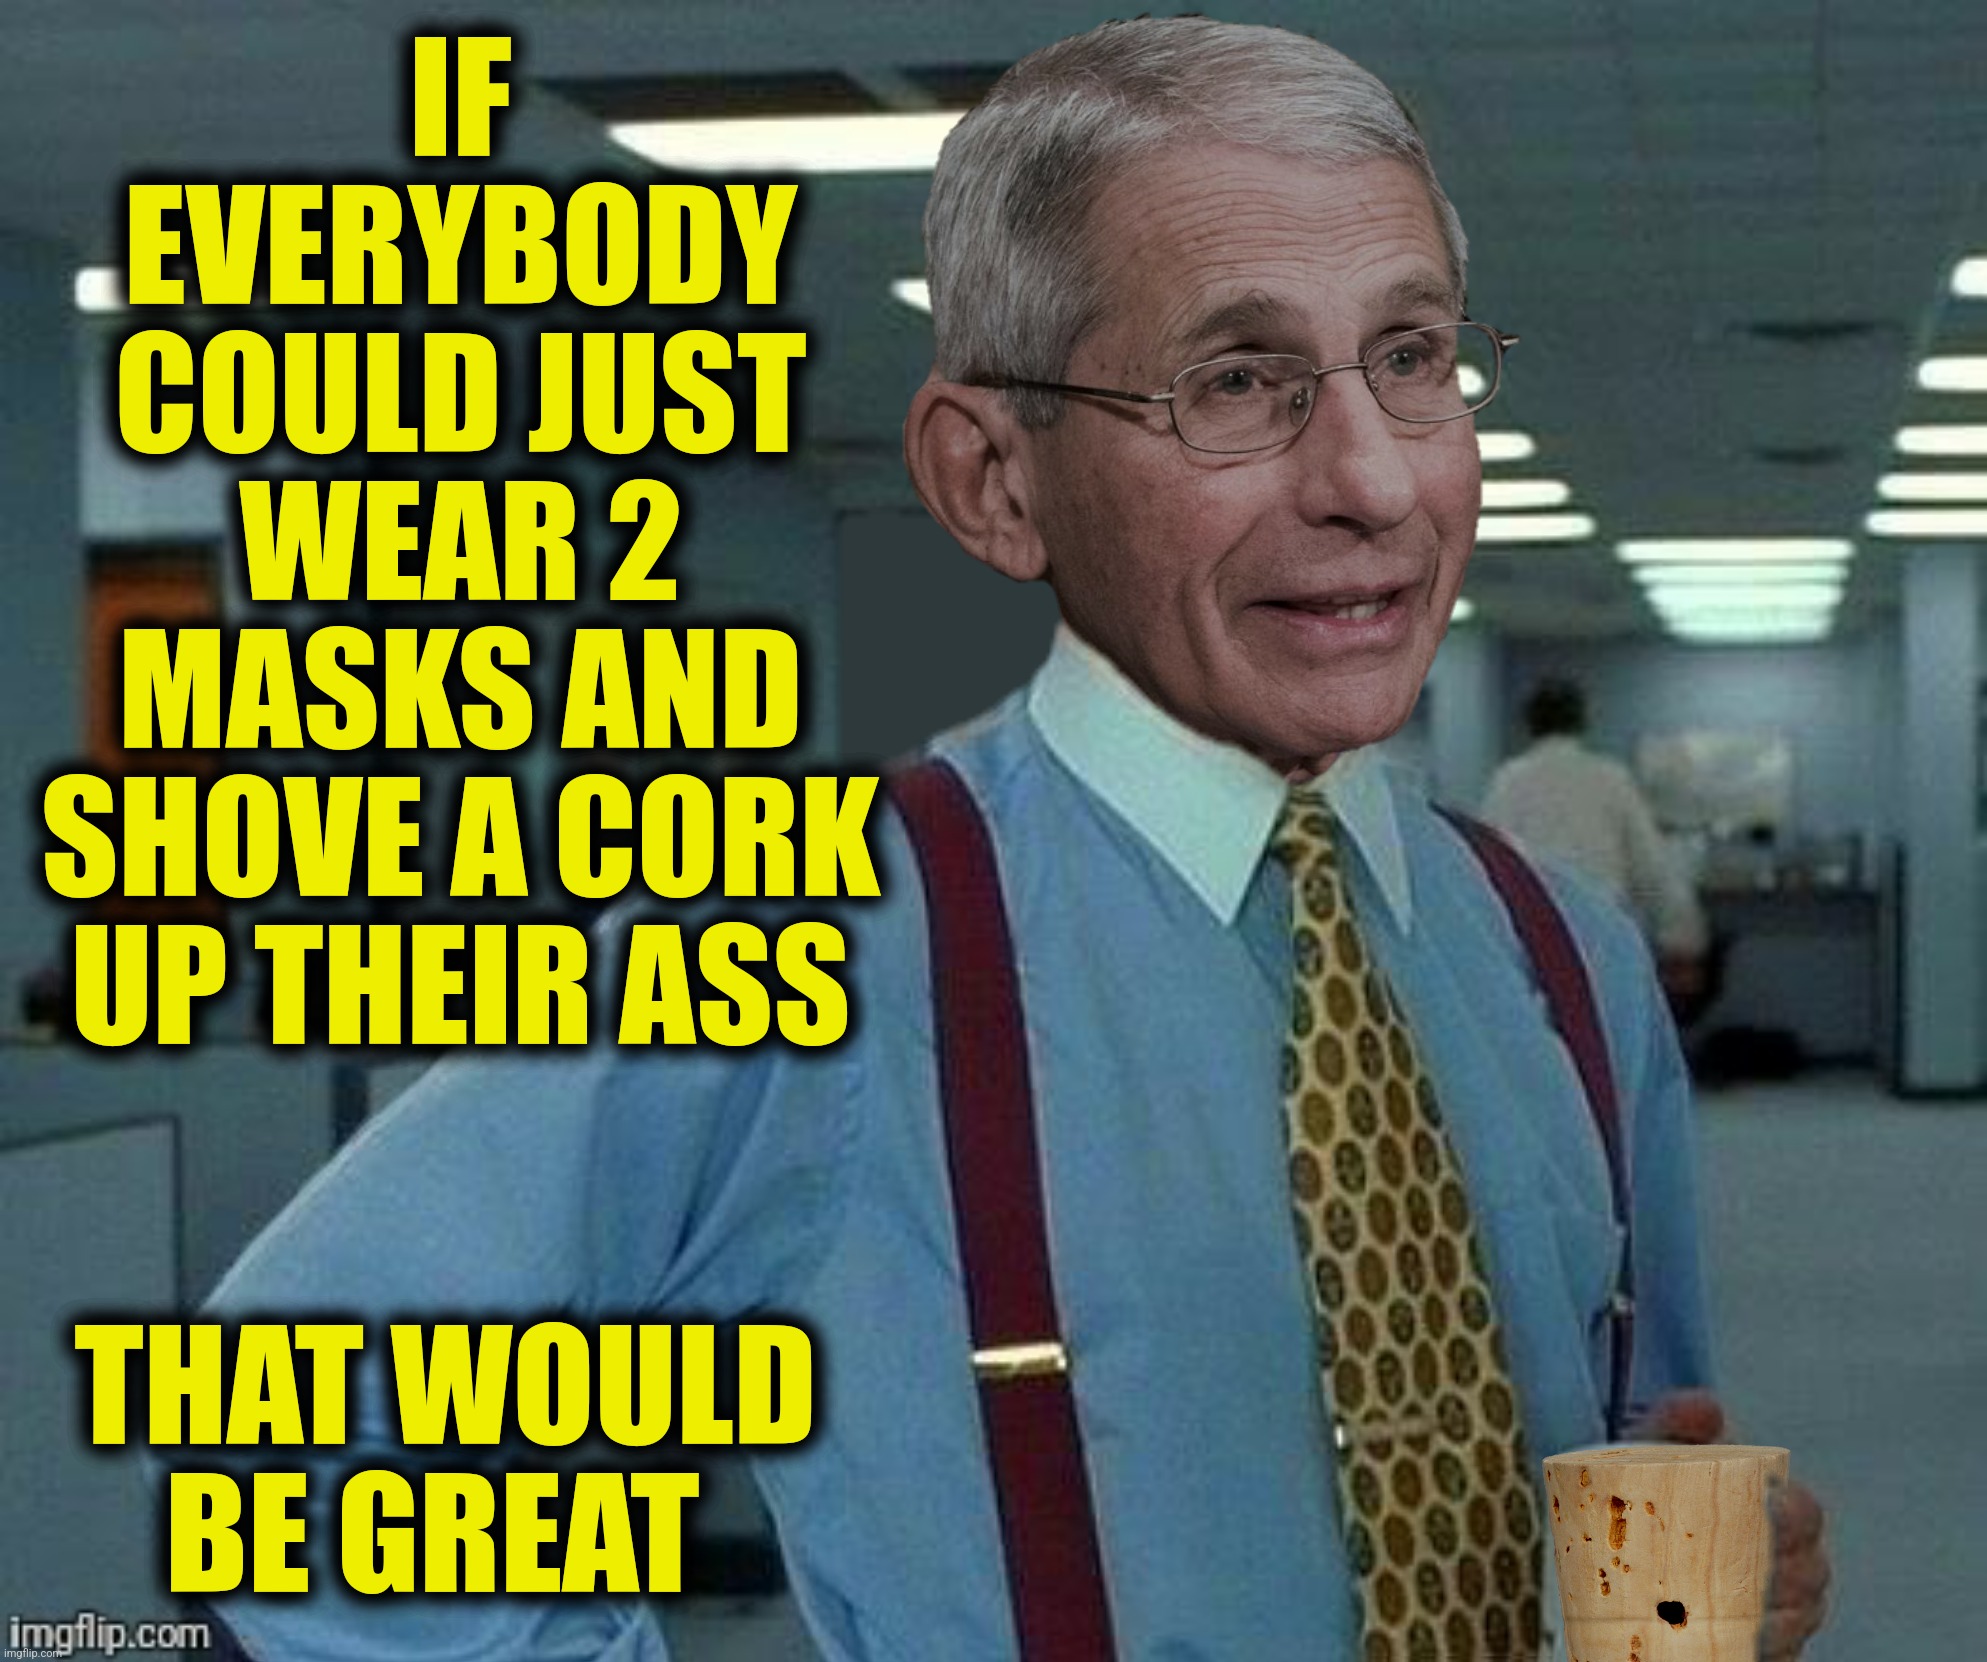 IF EVERYBODY COULD JUST WEAR 2 MASKS AND SHOVE A CORK UP THEIR ASS THAT WOULD BE GREAT | made w/ Imgflip meme maker